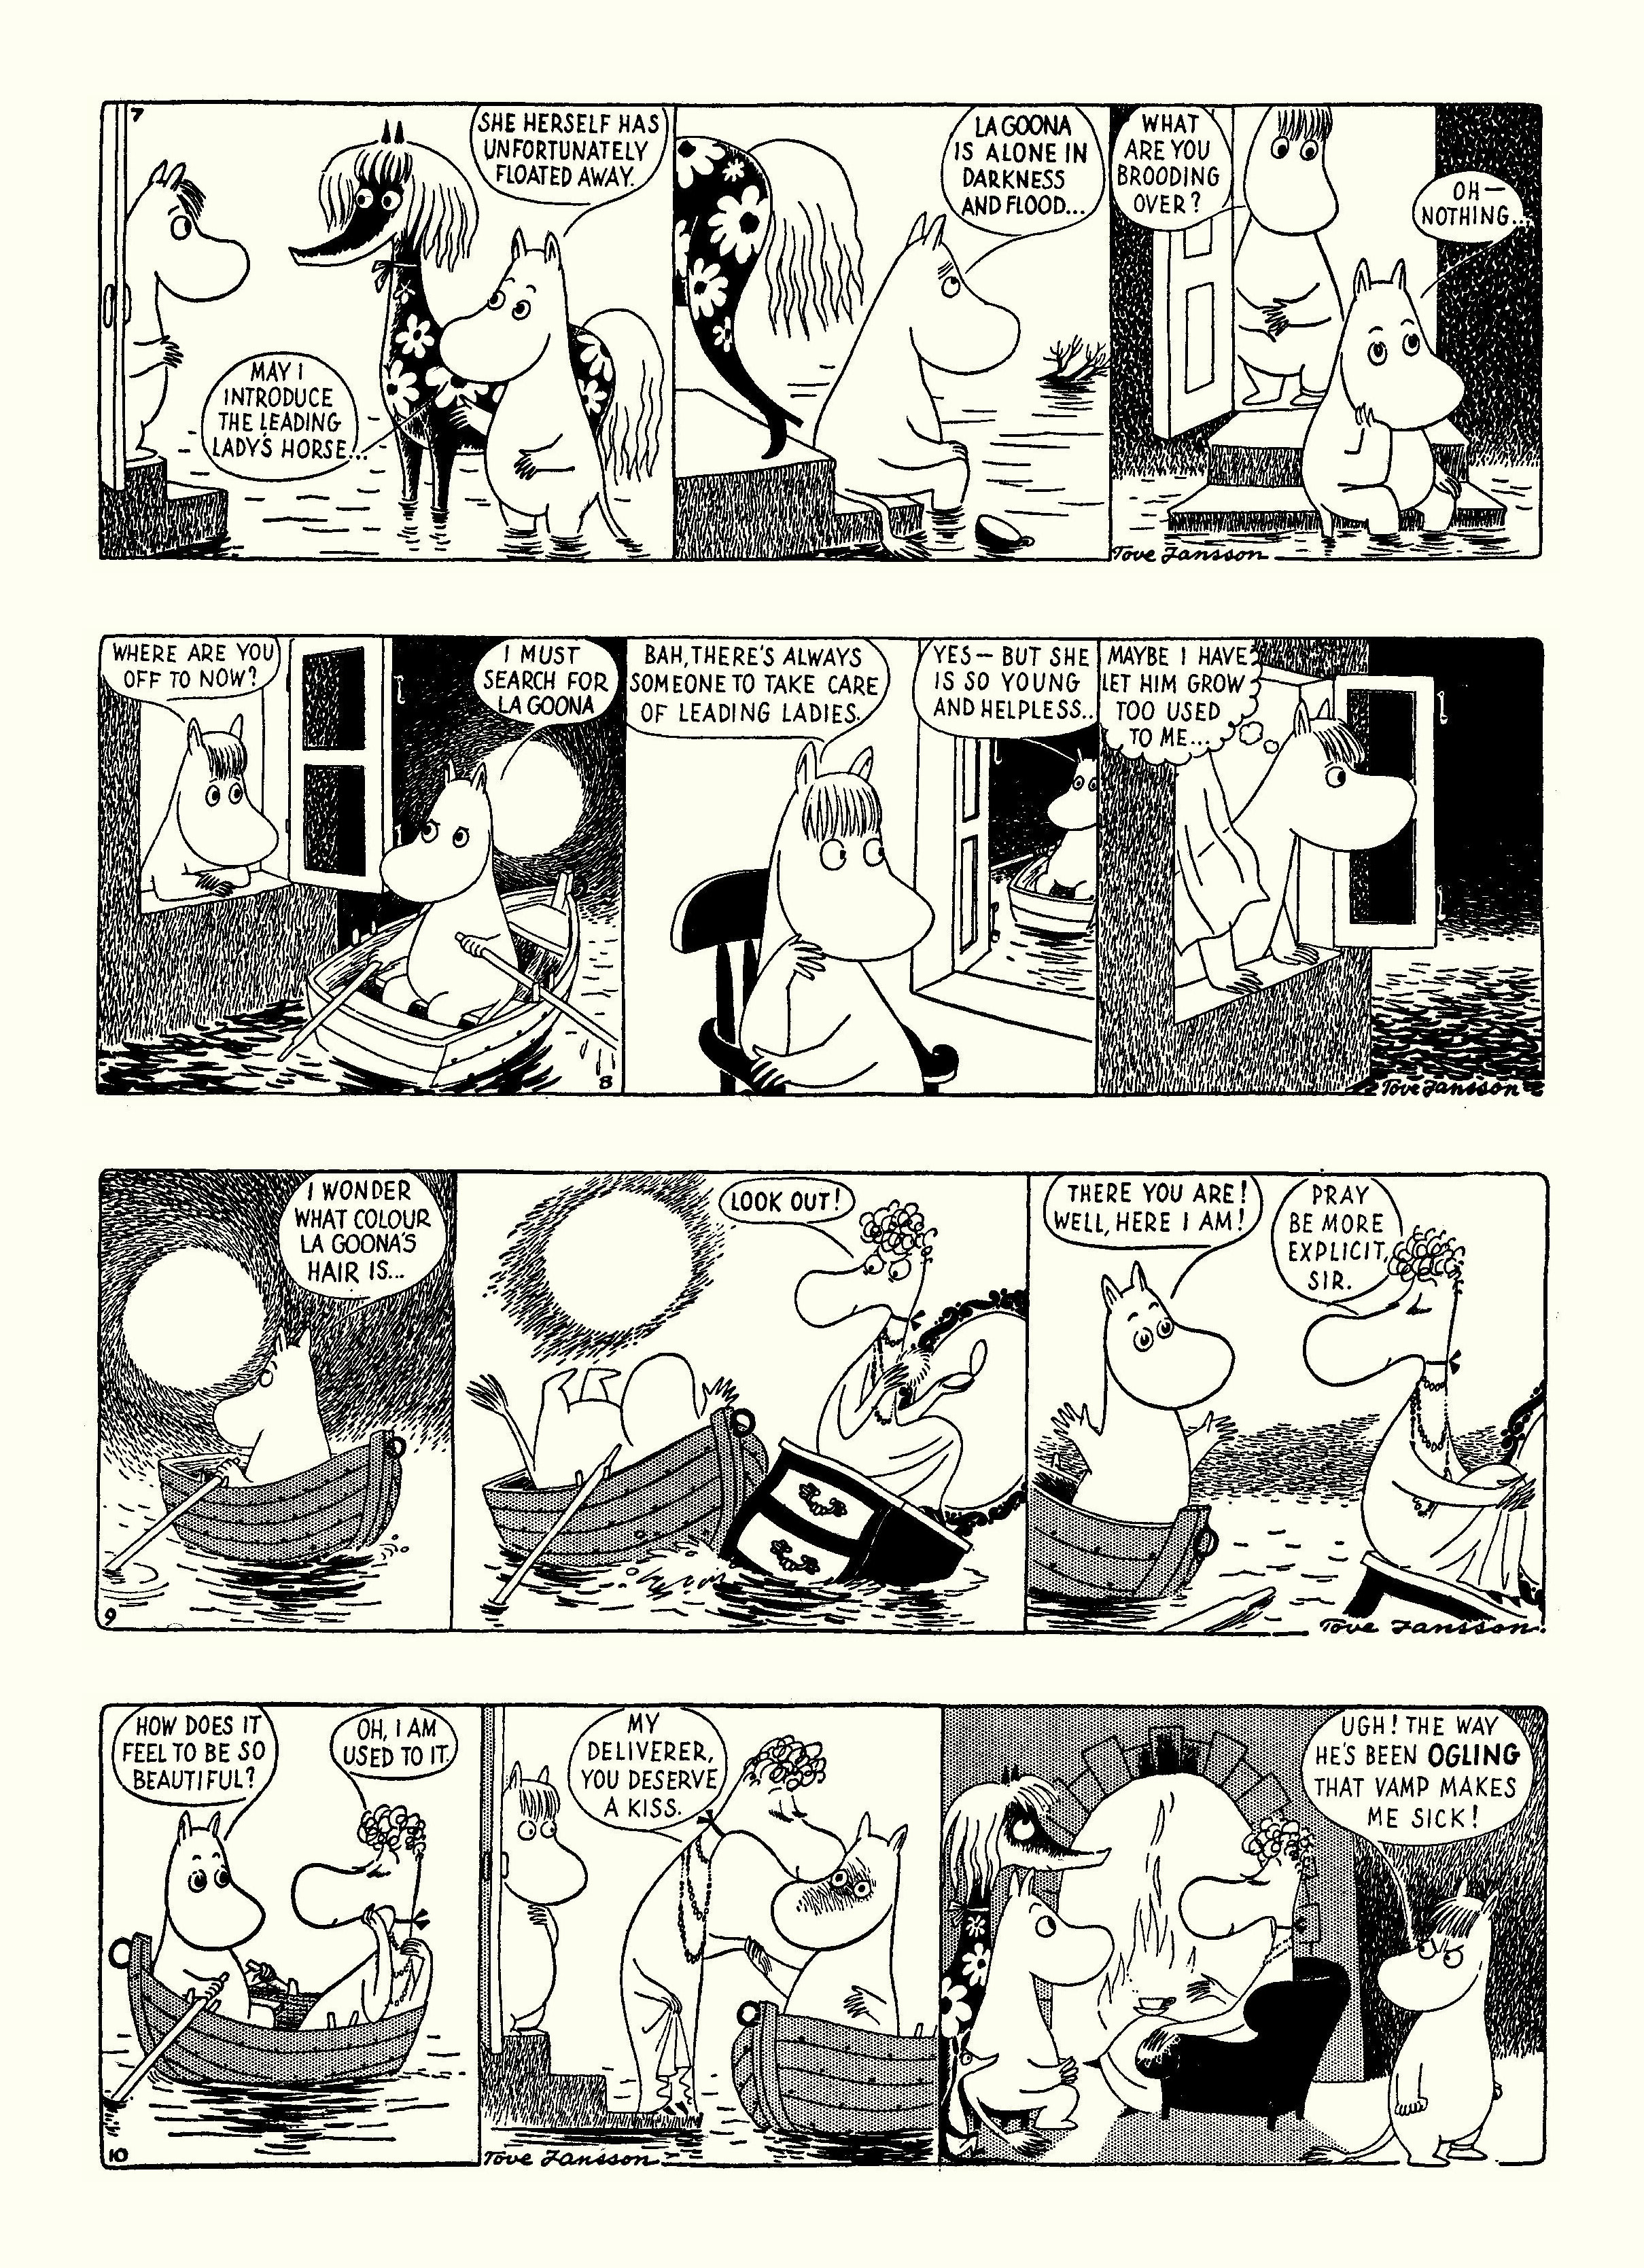 Read online Moomin: The Complete Tove Jansson Comic Strip comic -  Issue # TPB 3 - 8